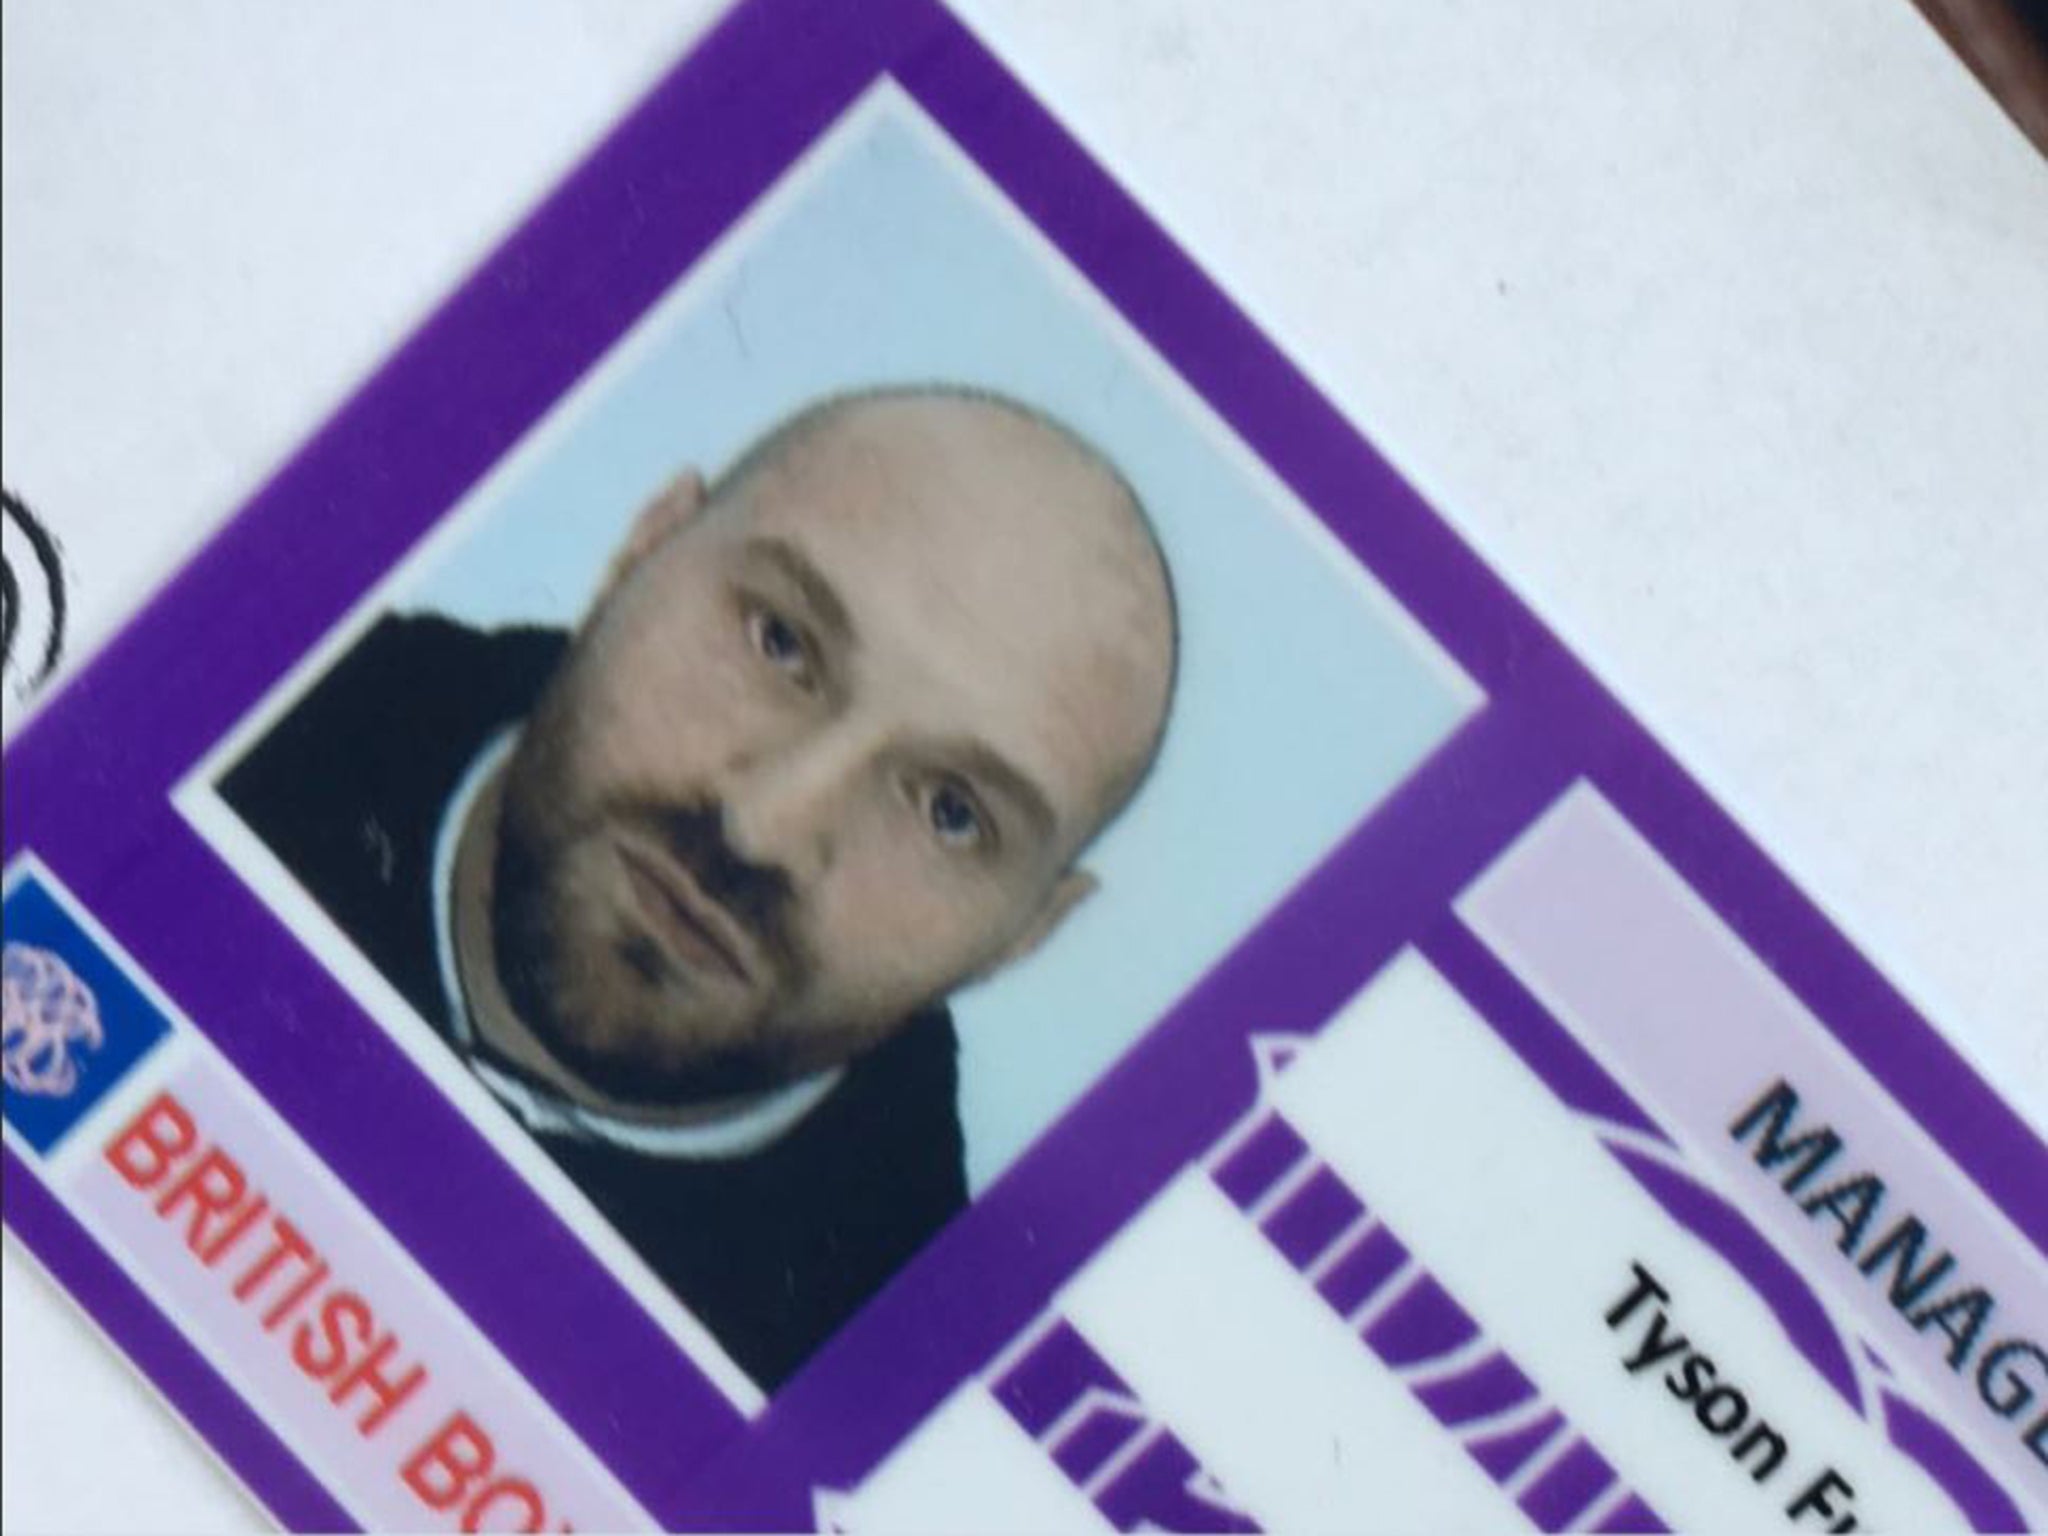 Fury also revealed he has been granted a manager's licence